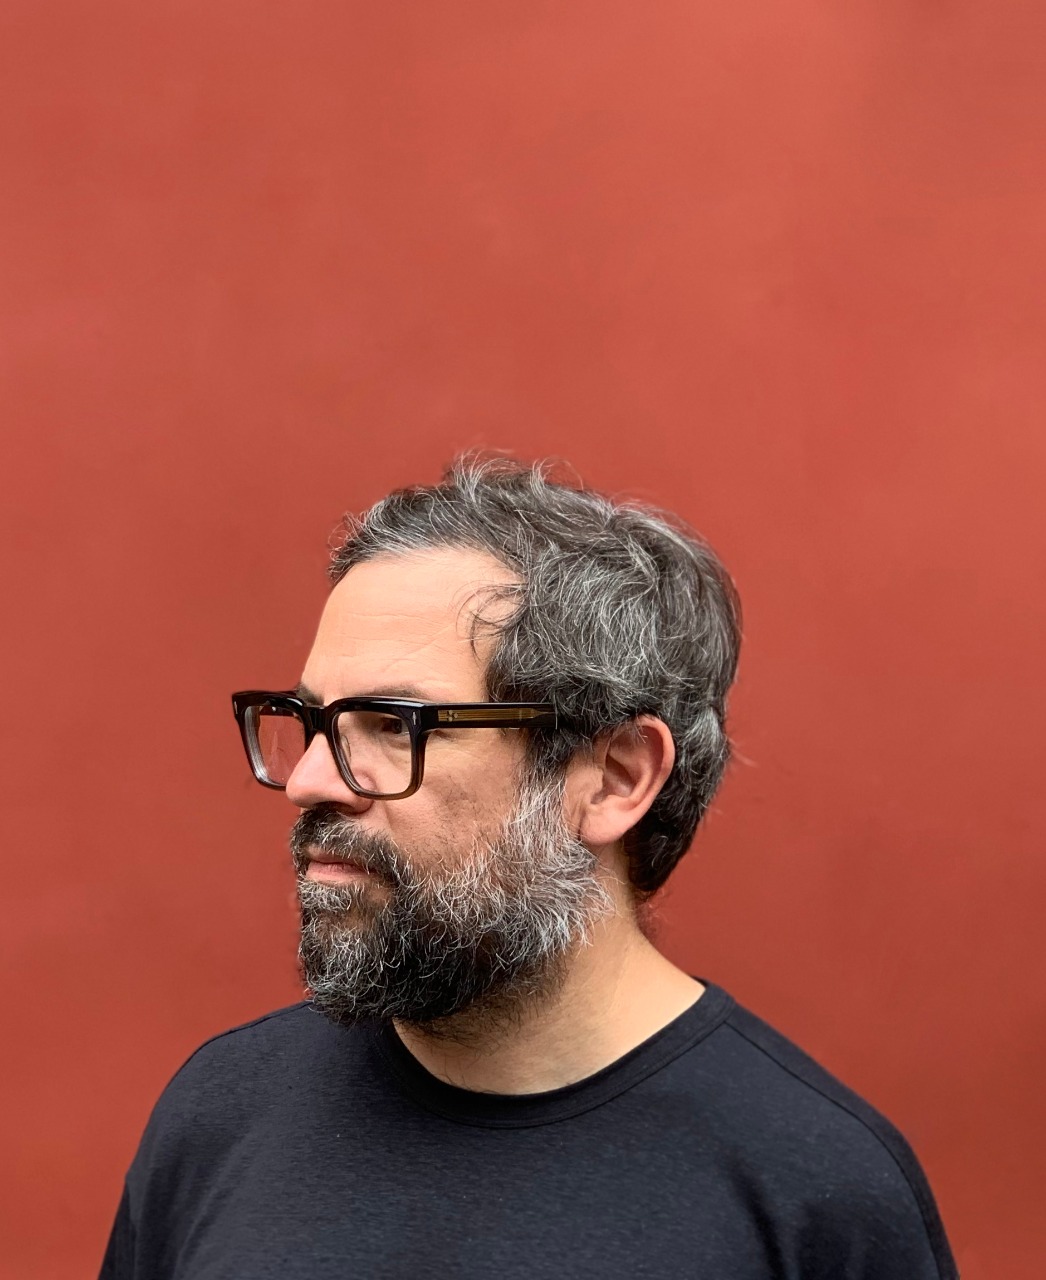 A portrait of Pedro Reyes against a bright red background. He is wearing a black t-shirt and glasses with thick, black frames, and his graying hair rests in a tousled fashion atop his head. 